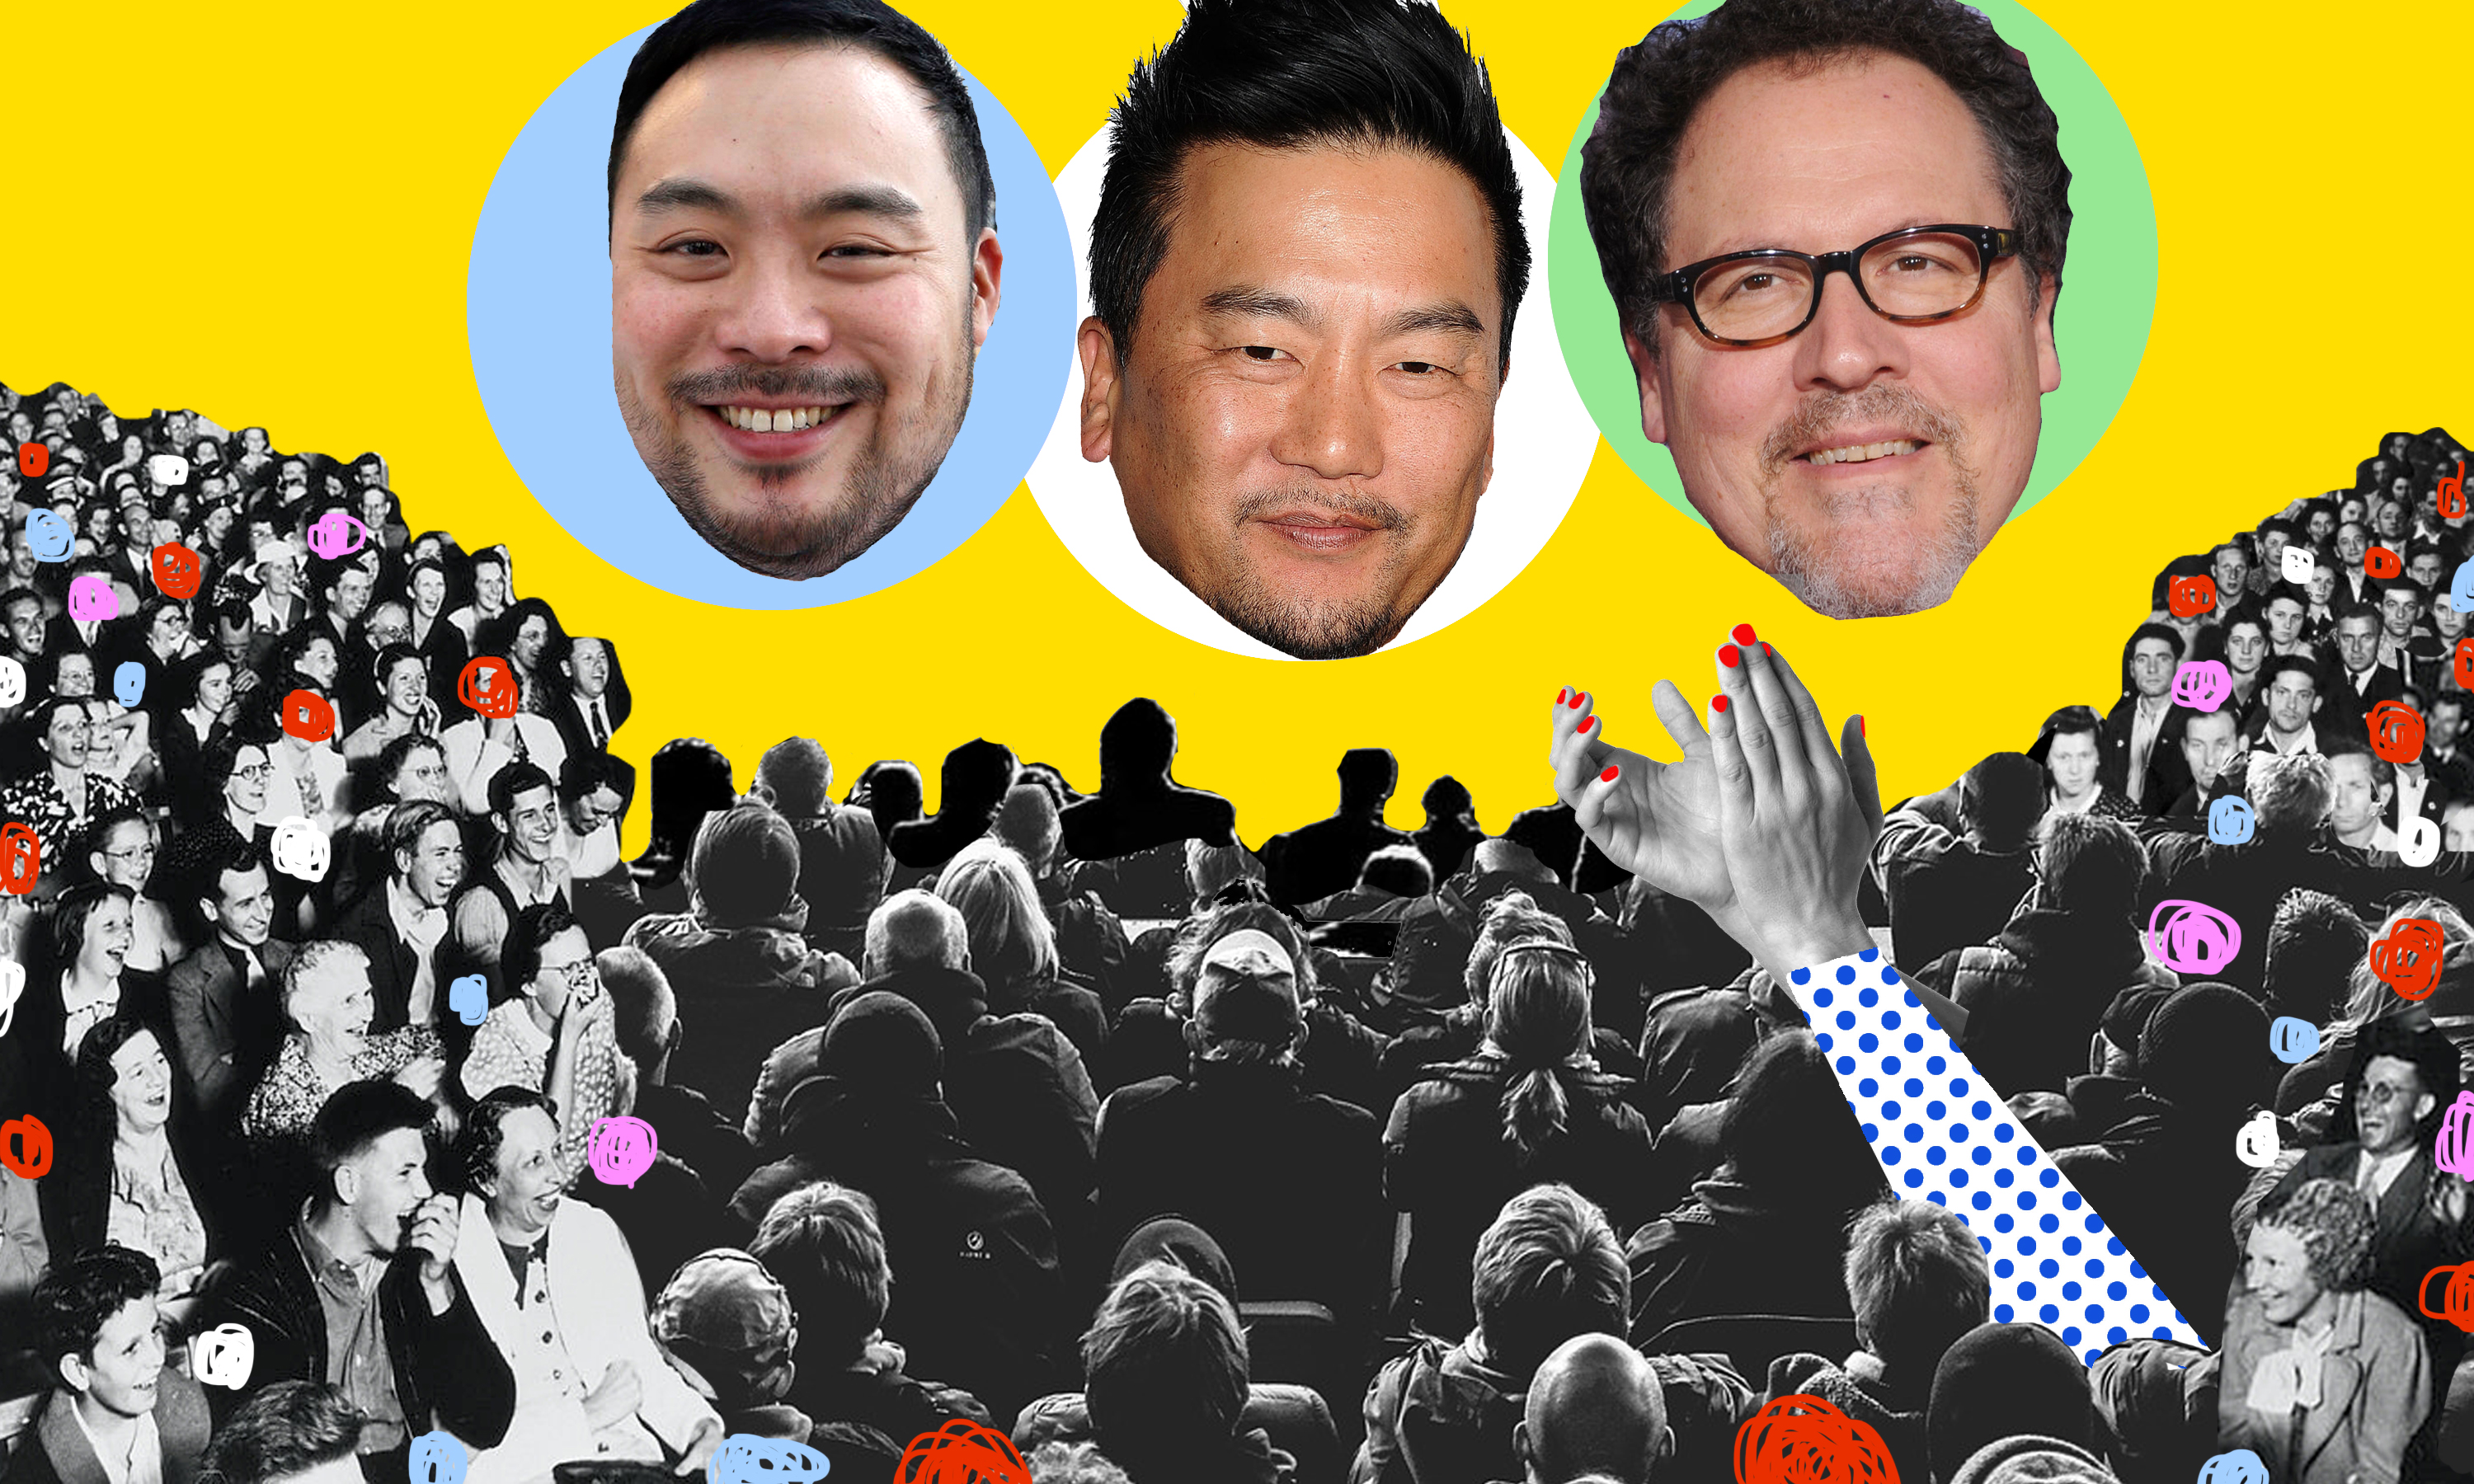 The heads of David Chang, Roy Choi, and Jon Favreau float over a theater crowd in black and white.